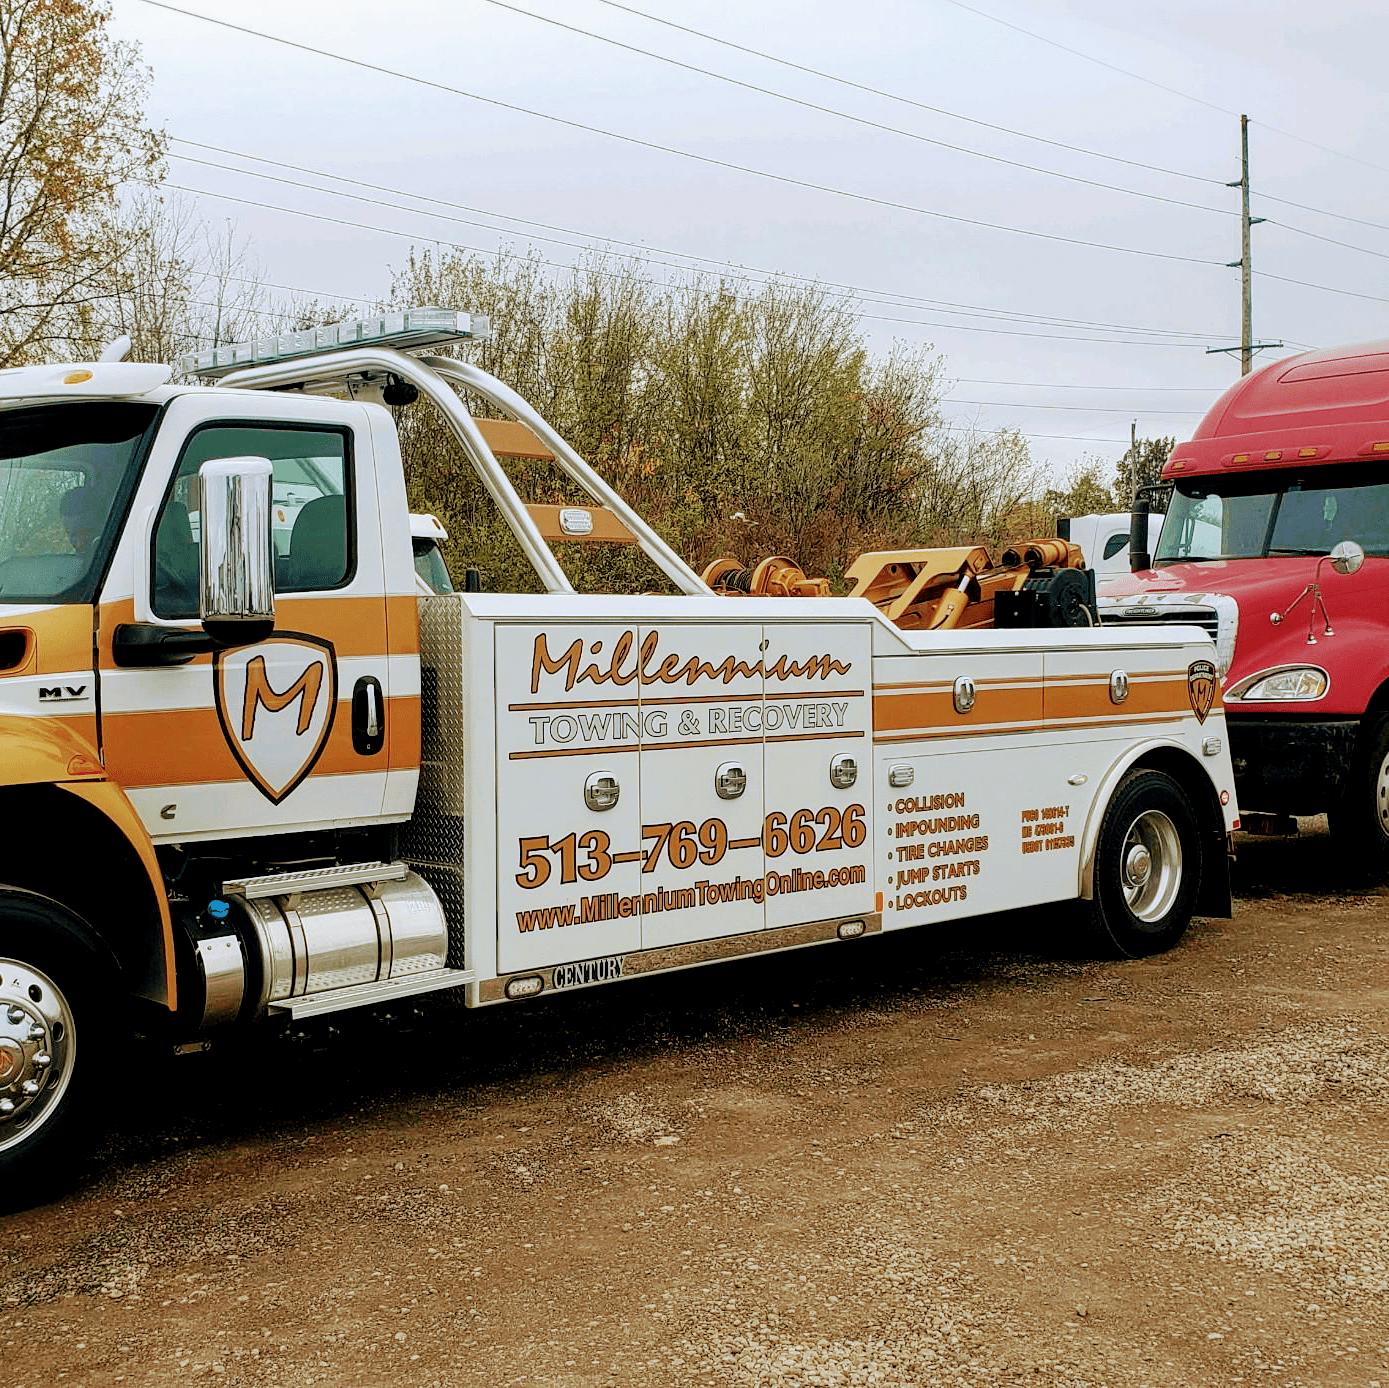 Millennium Towing & Recovery - Cincinnati (OH 45223), US, 24 hour towing service near me